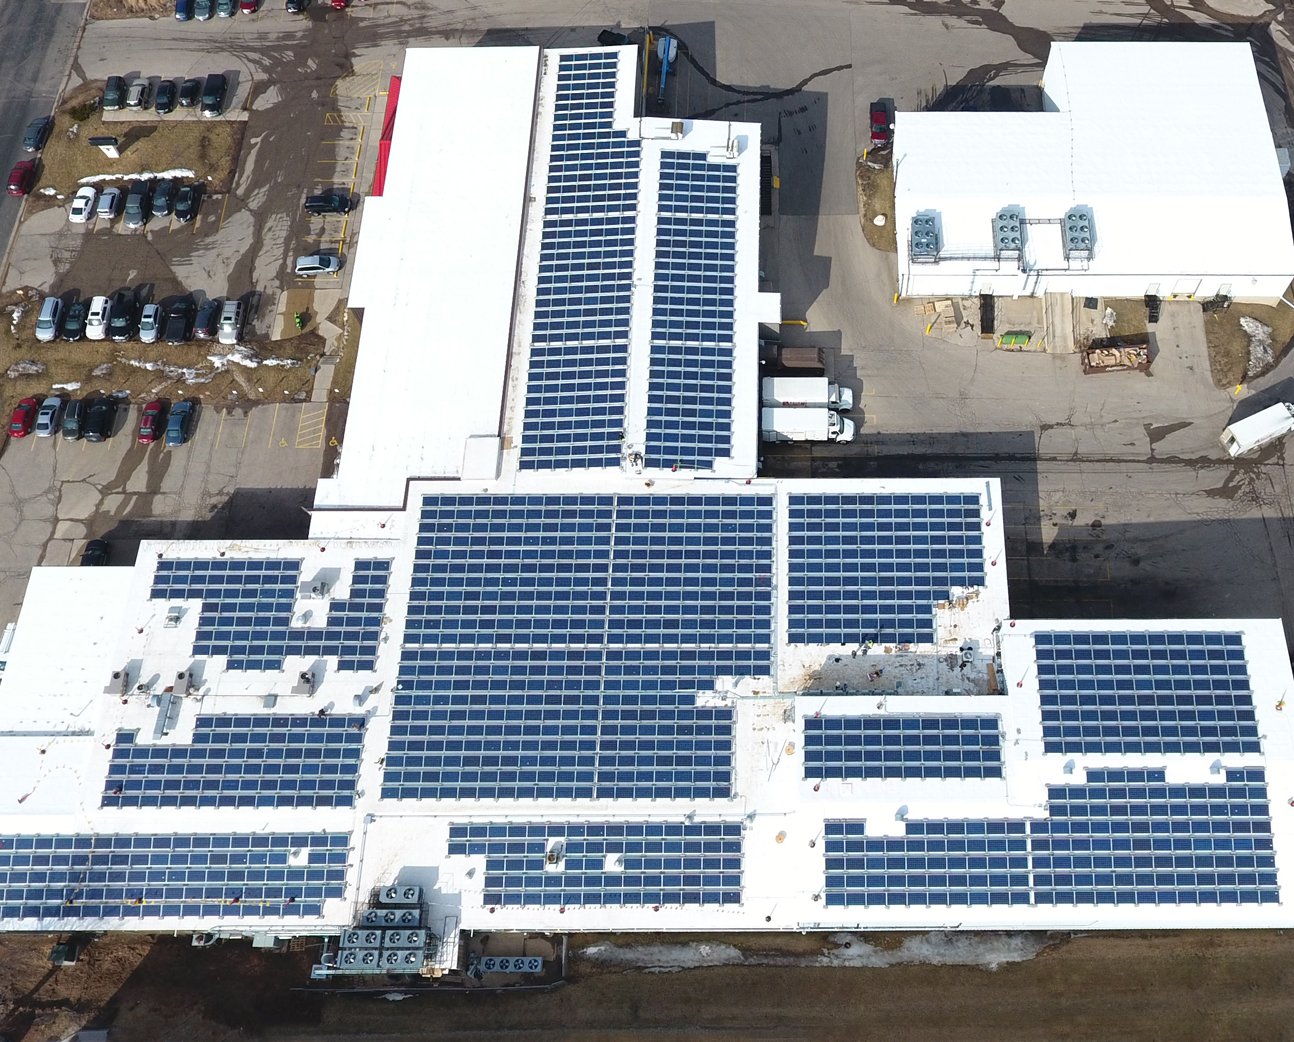 An aerial view of rooftop solar panels, representing SunPeak’s work as a commercial solar installation company.